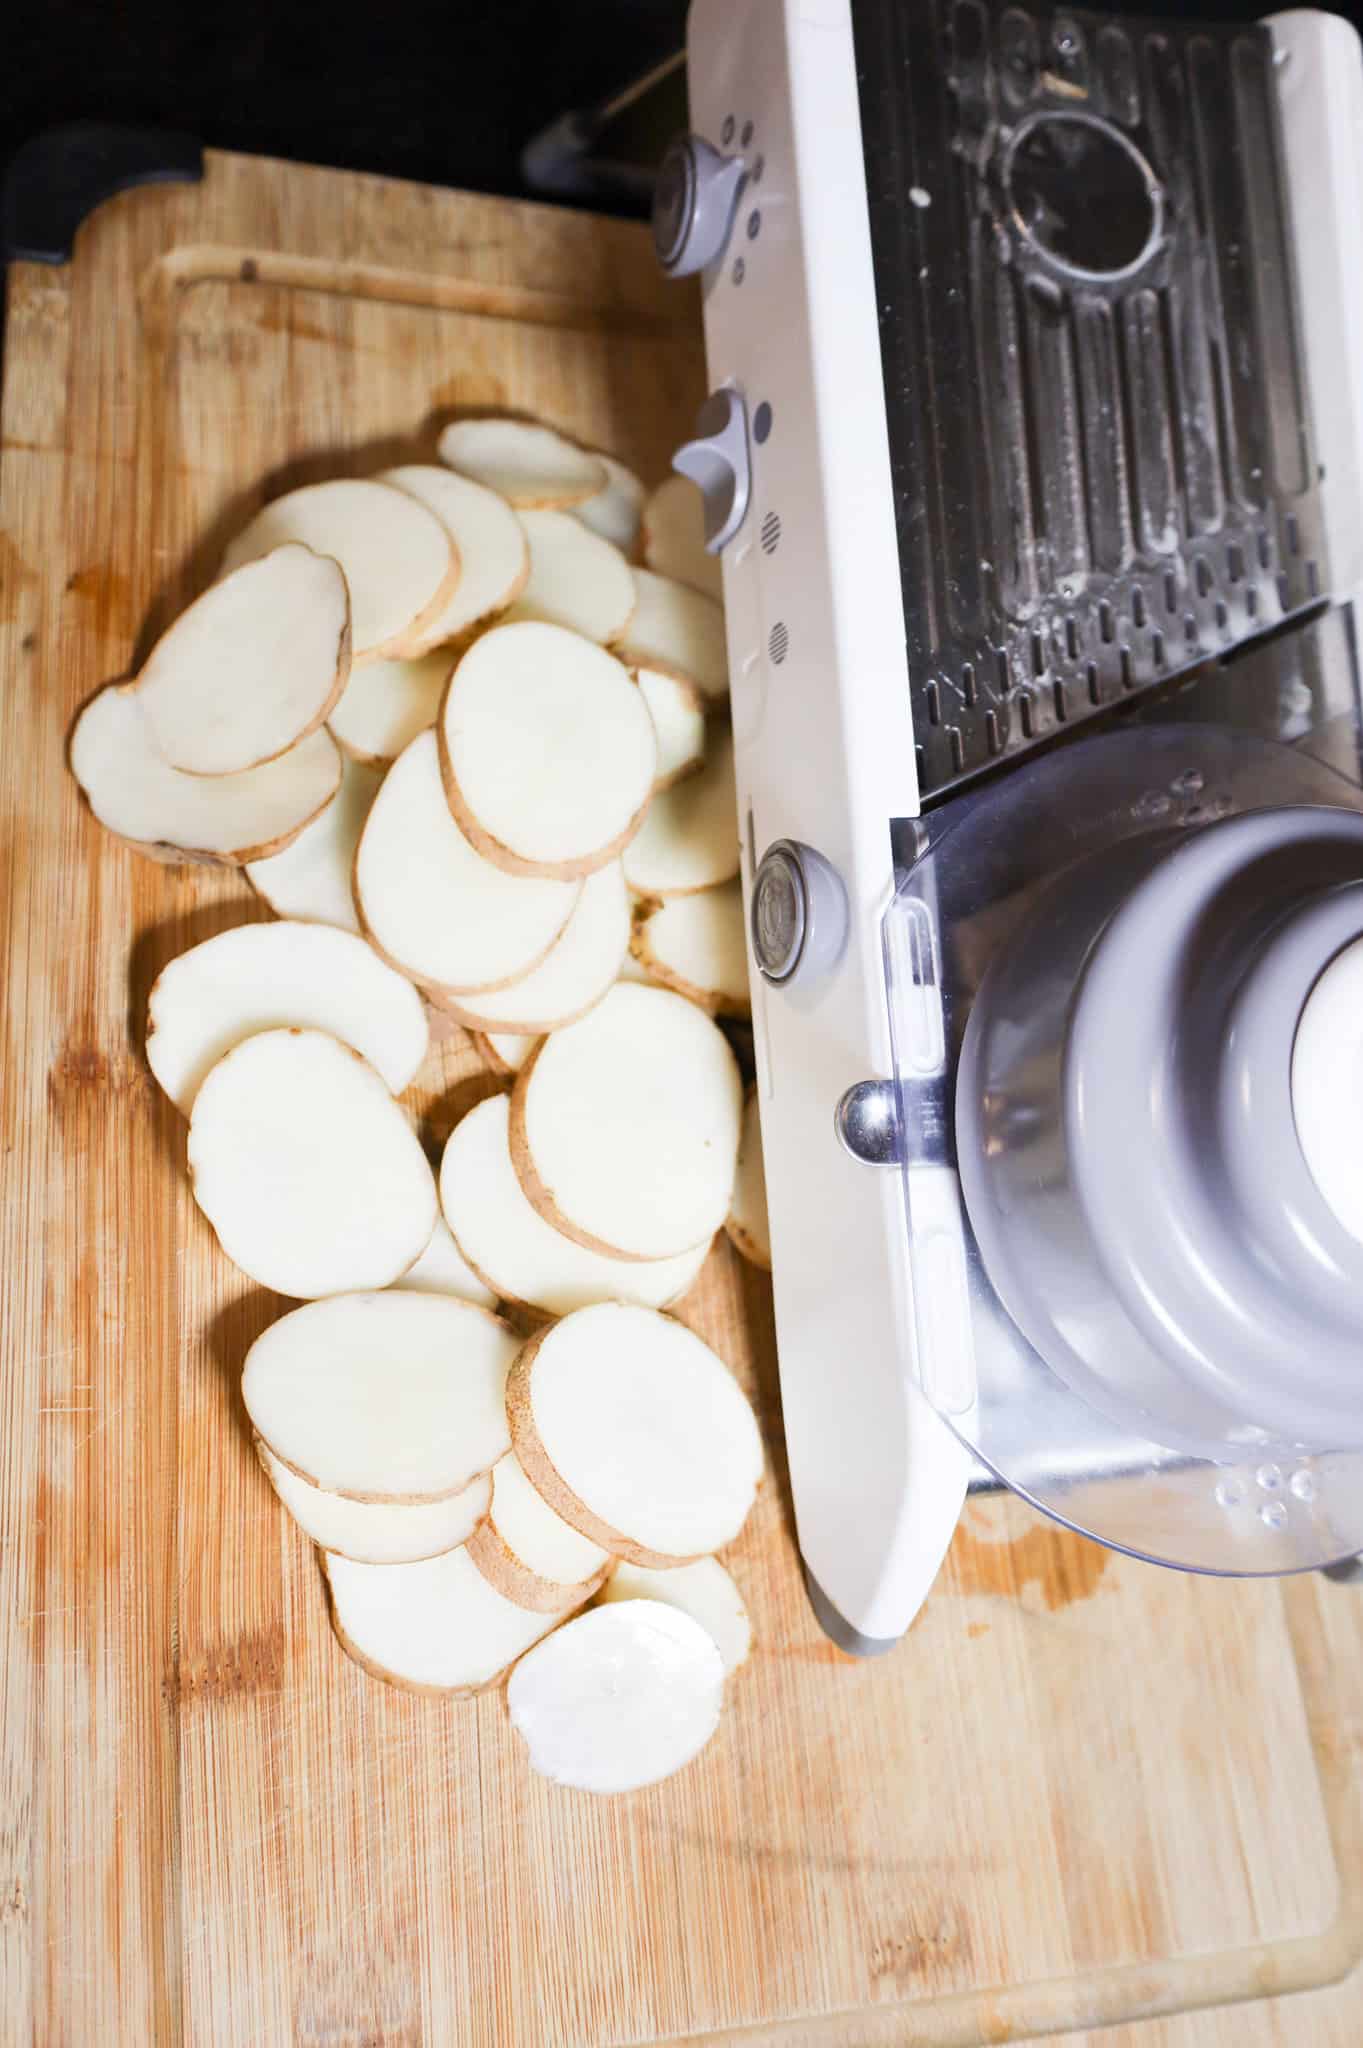 sliced potatoes and a mandoline slicer on a cutting board